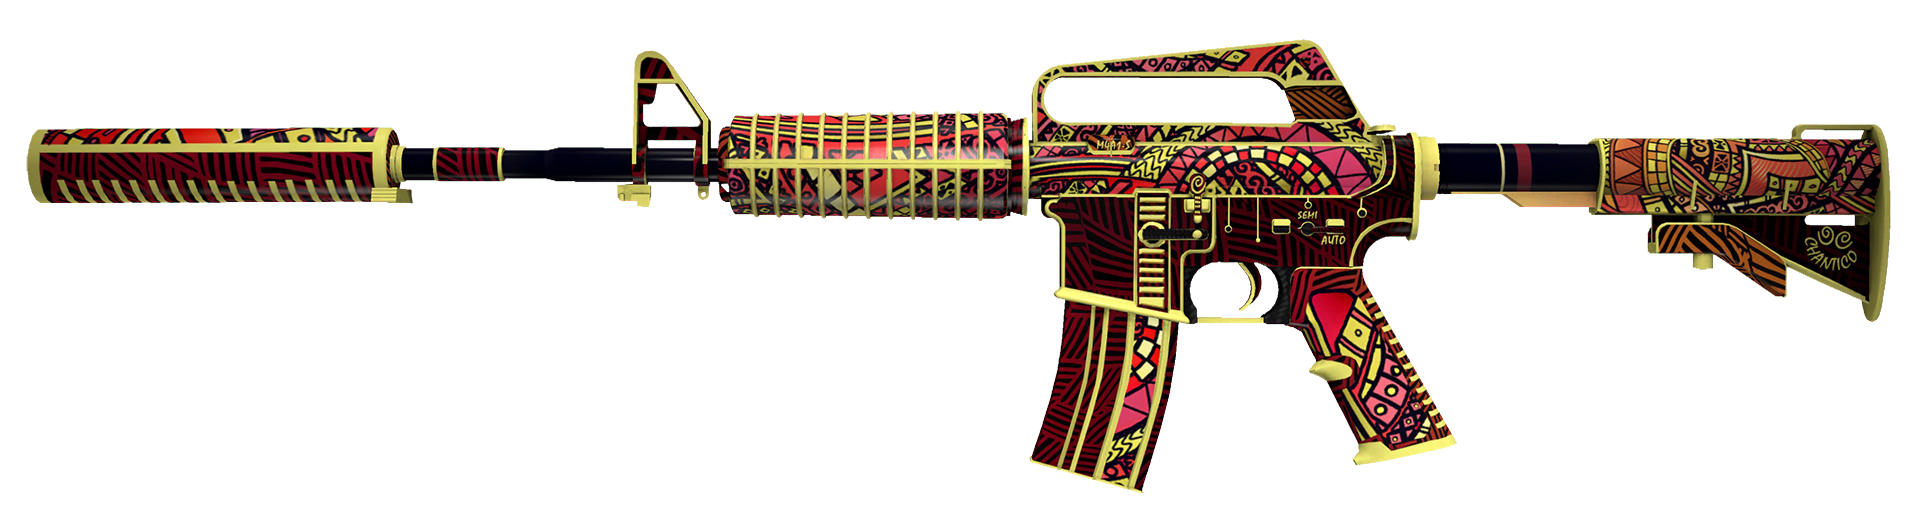 M4A1-S Chantico's Fire Large Rendering